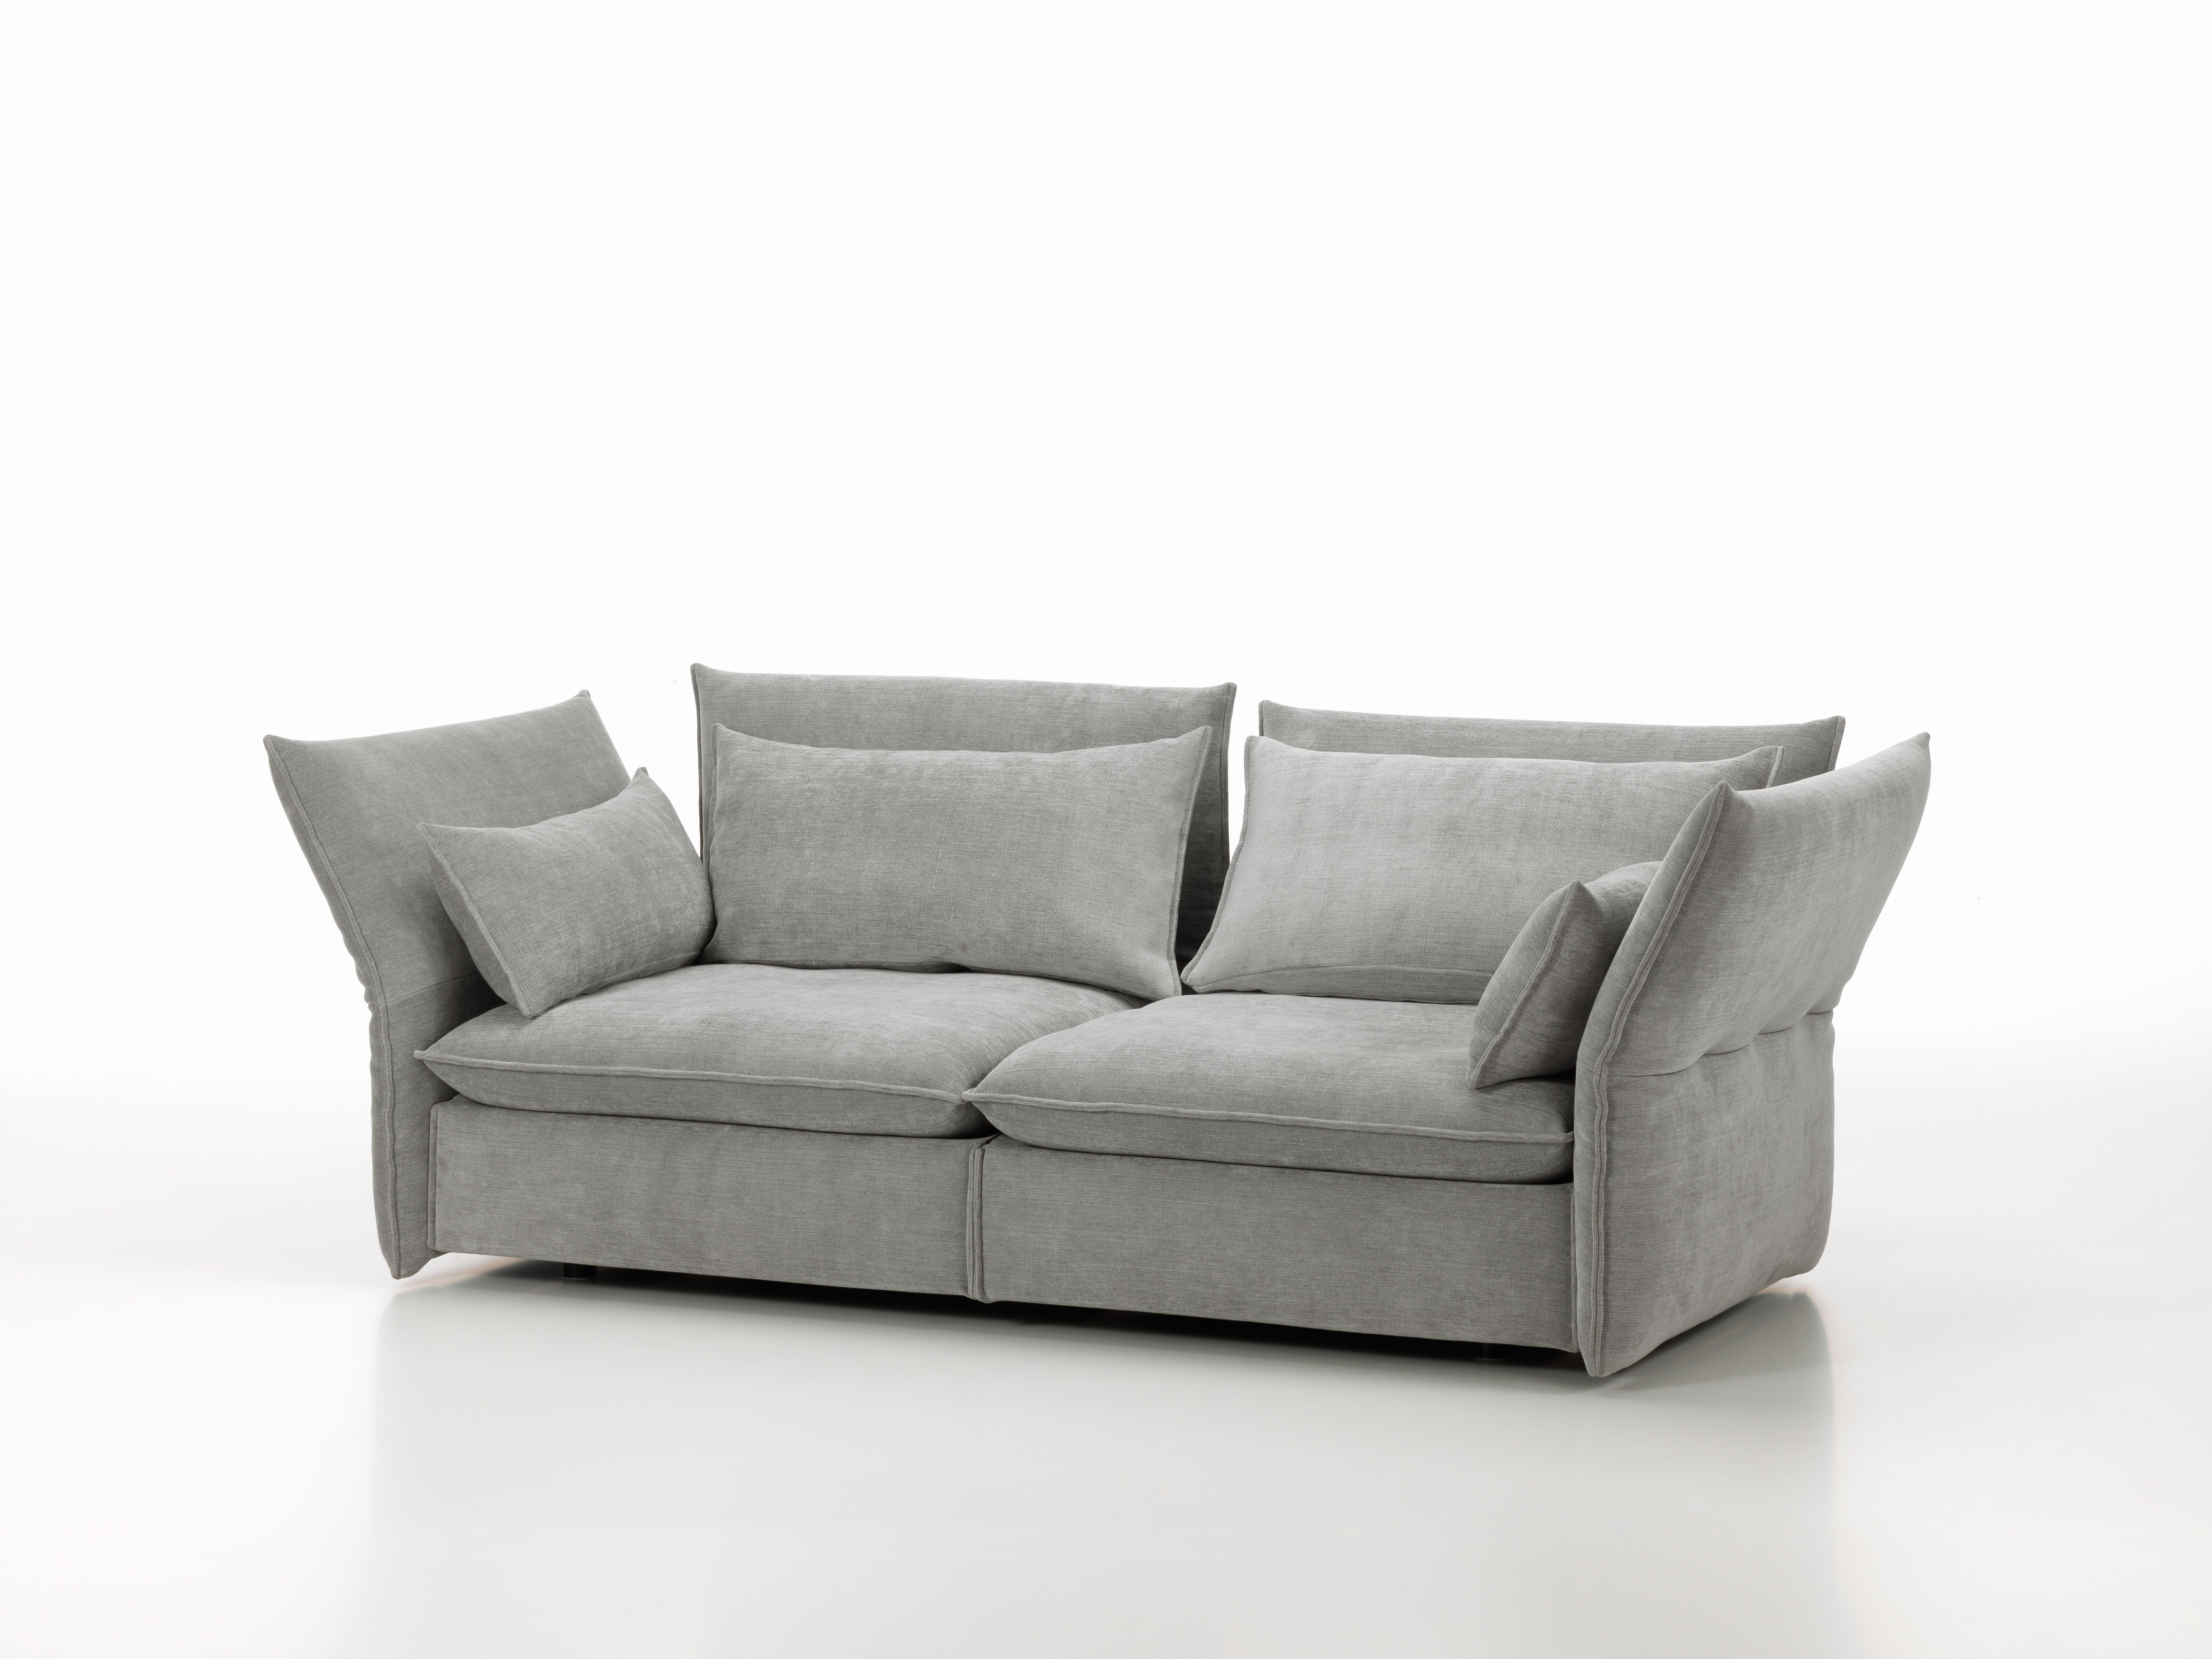 Metal Vitra Mariposa 2 1/2-Seat Sofa in Silver Grey by Edward Barber & Jay Osgerby For Sale